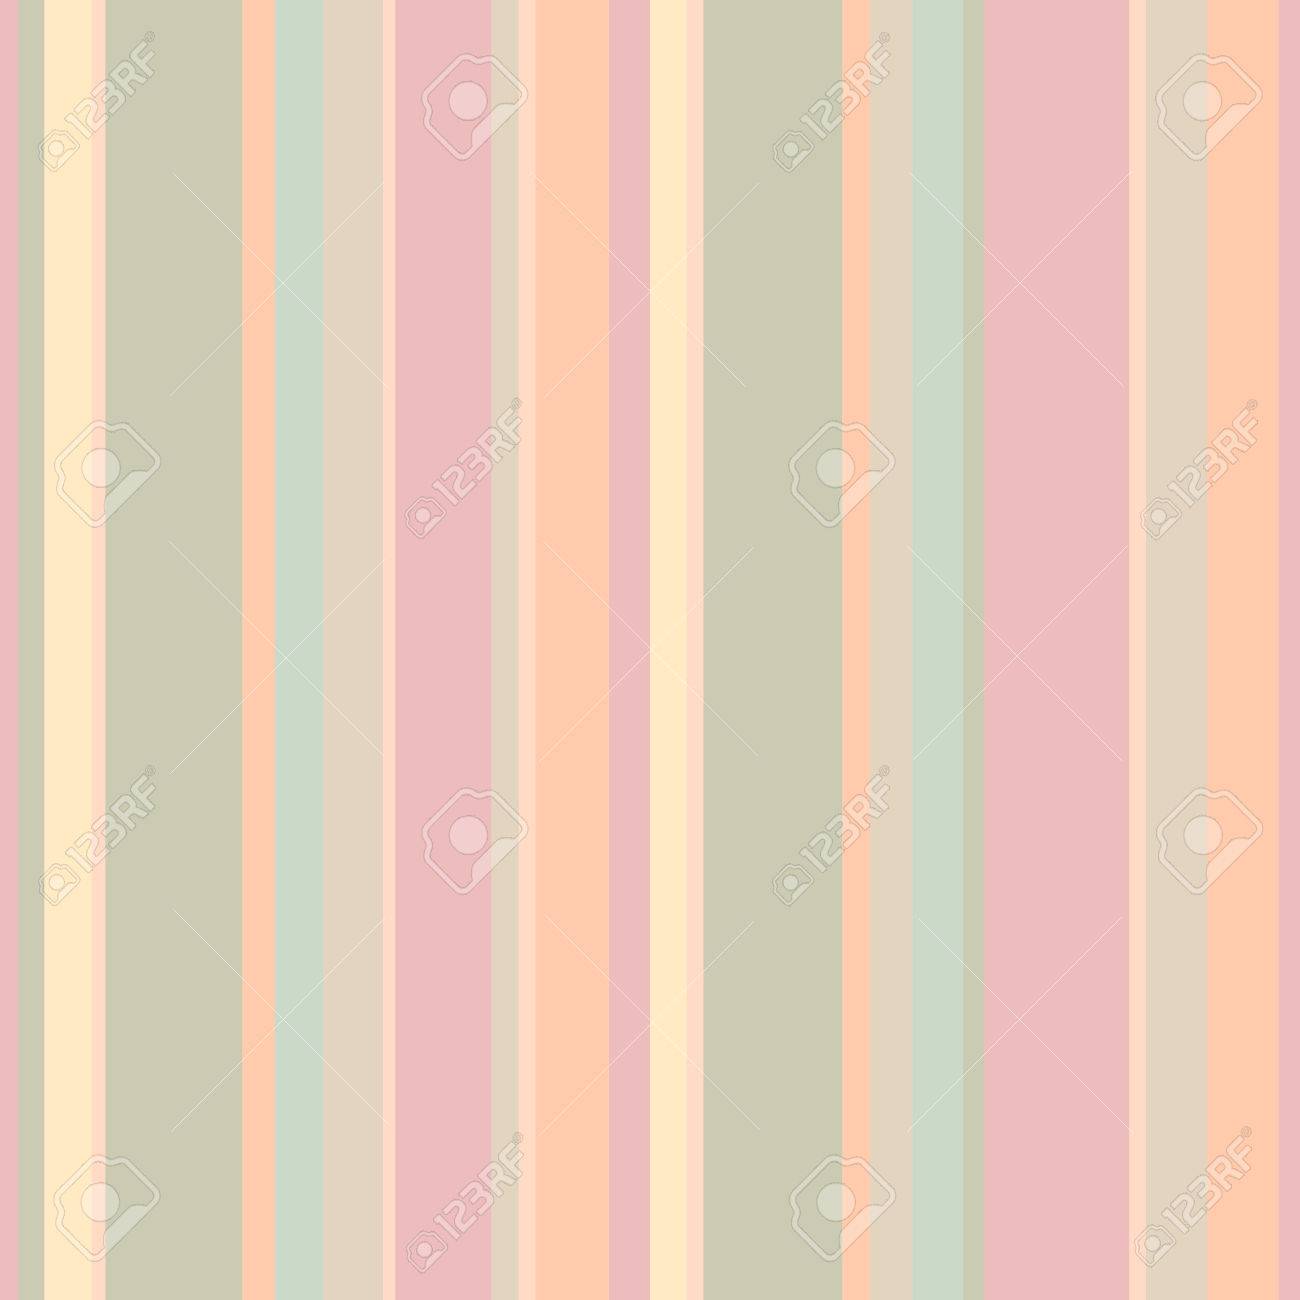 Abstract Vector Pastel Wallpaper With Vertical Strips Seamless